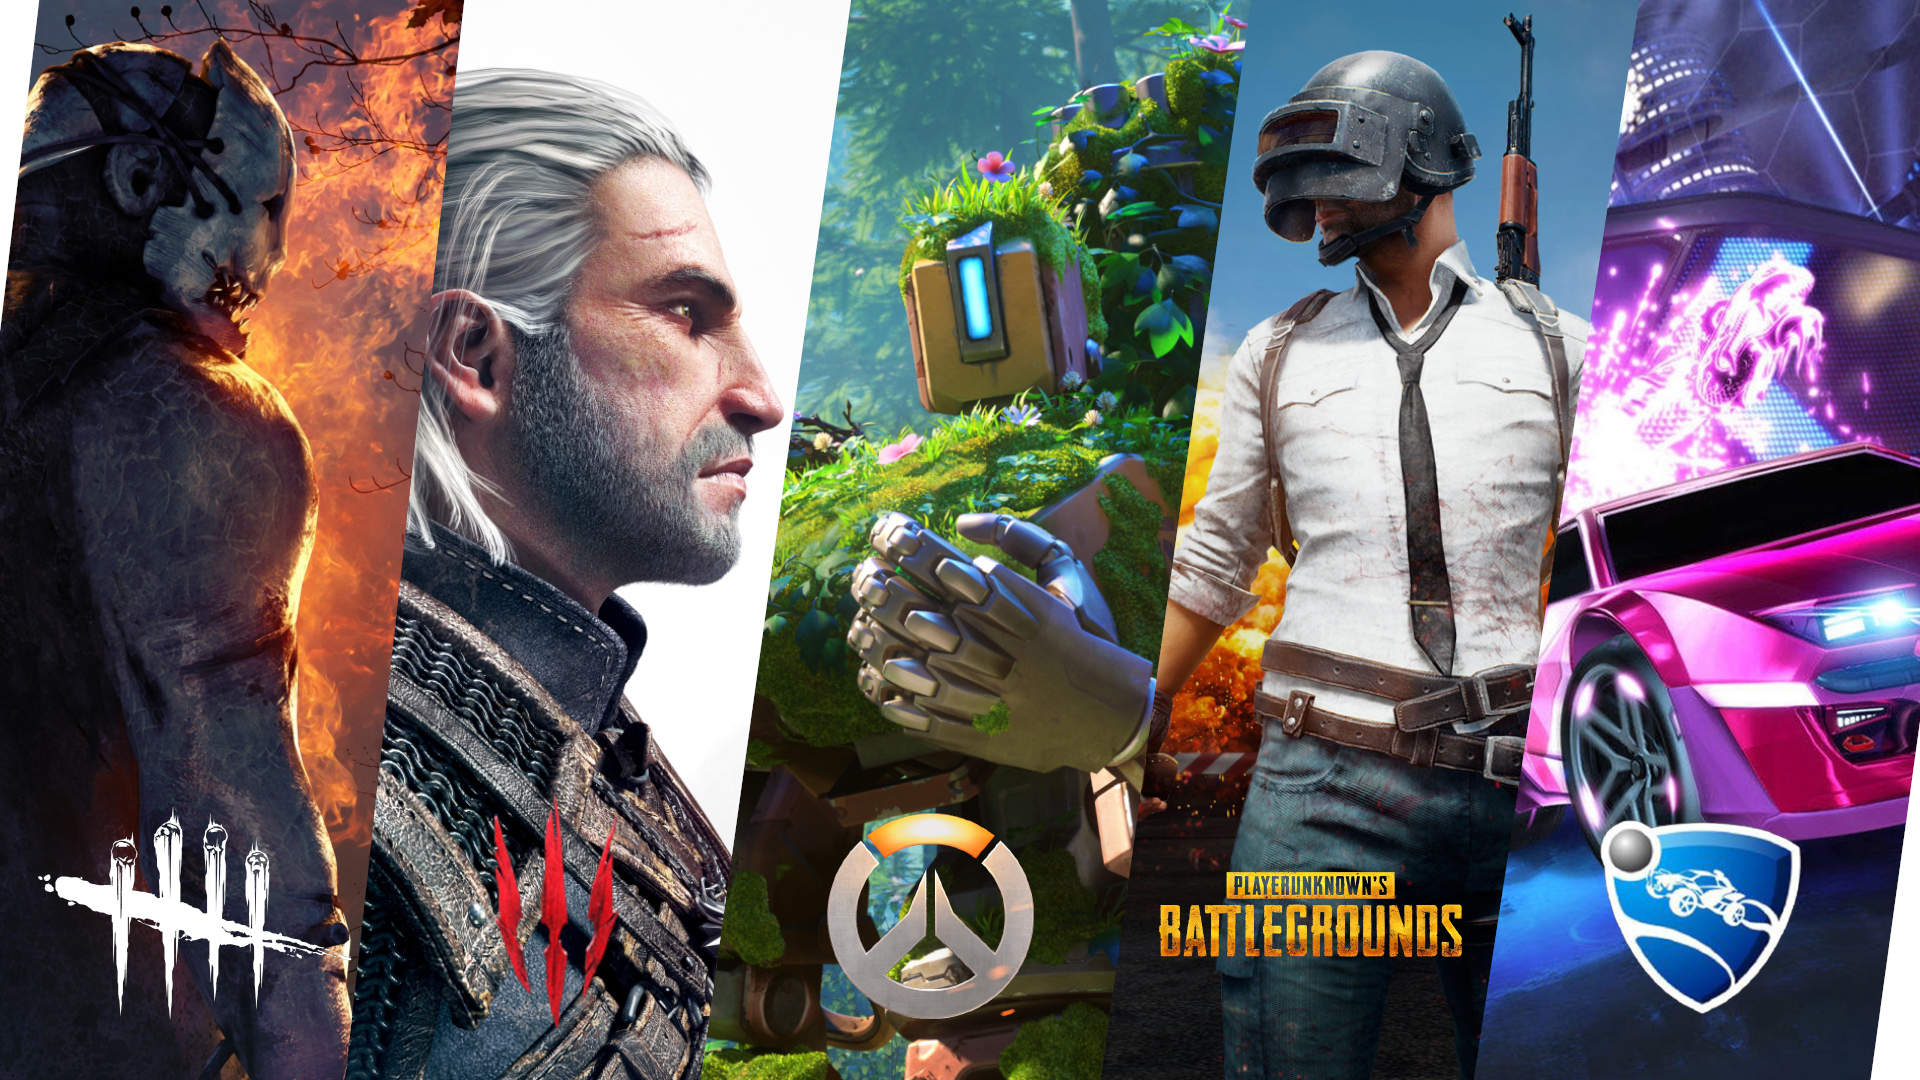 General 1920x1080 video game art collage video games The Witcher 3: Wild Hunt PUBG Rocket League Overwatch Dead by Daylight